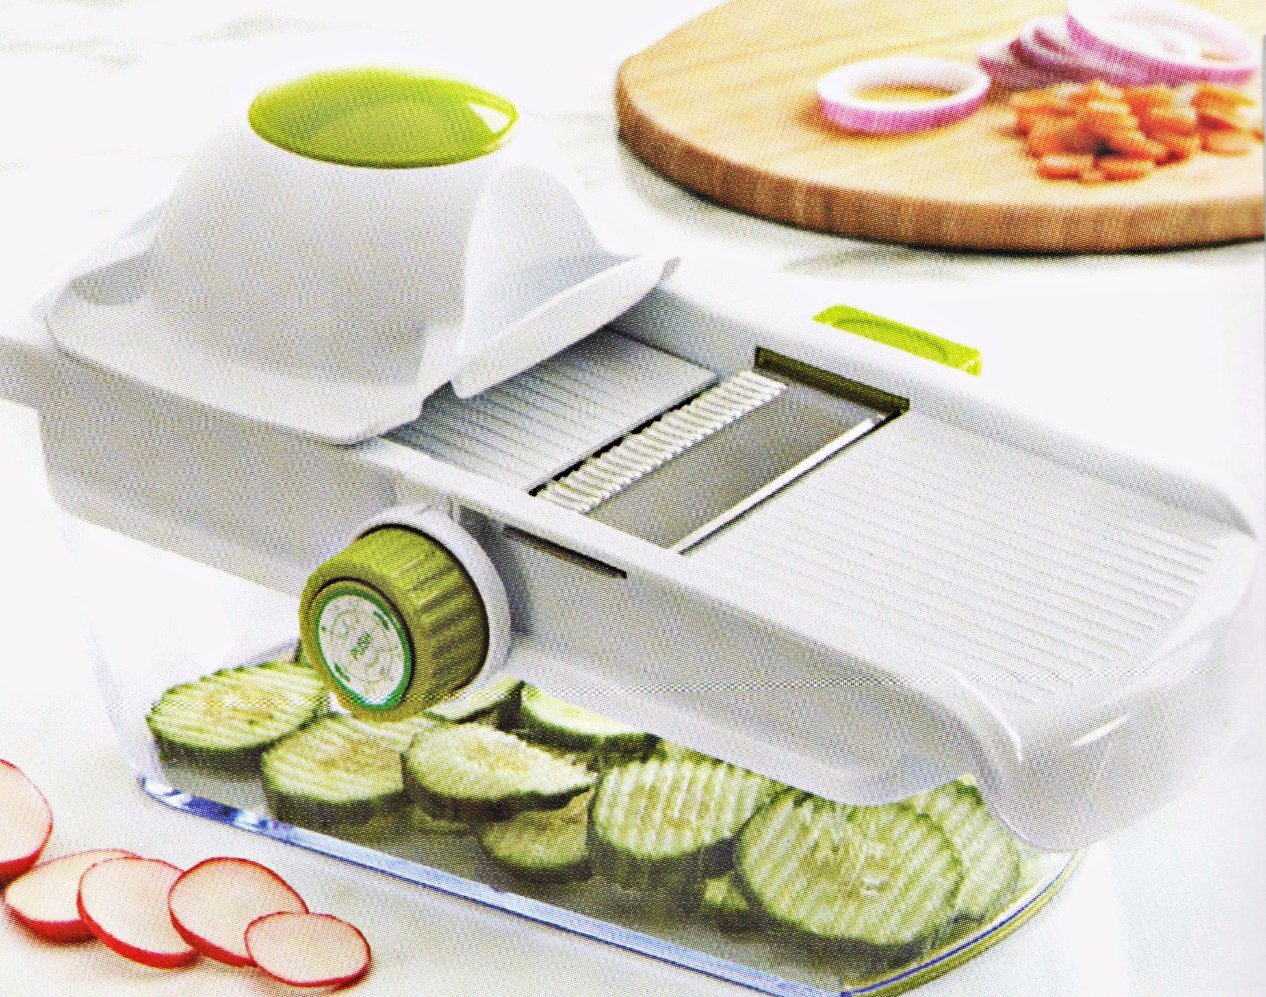 Plastic Food Processor Vegetable Chopper Cutting Machine with Steel Parts No. Cg019